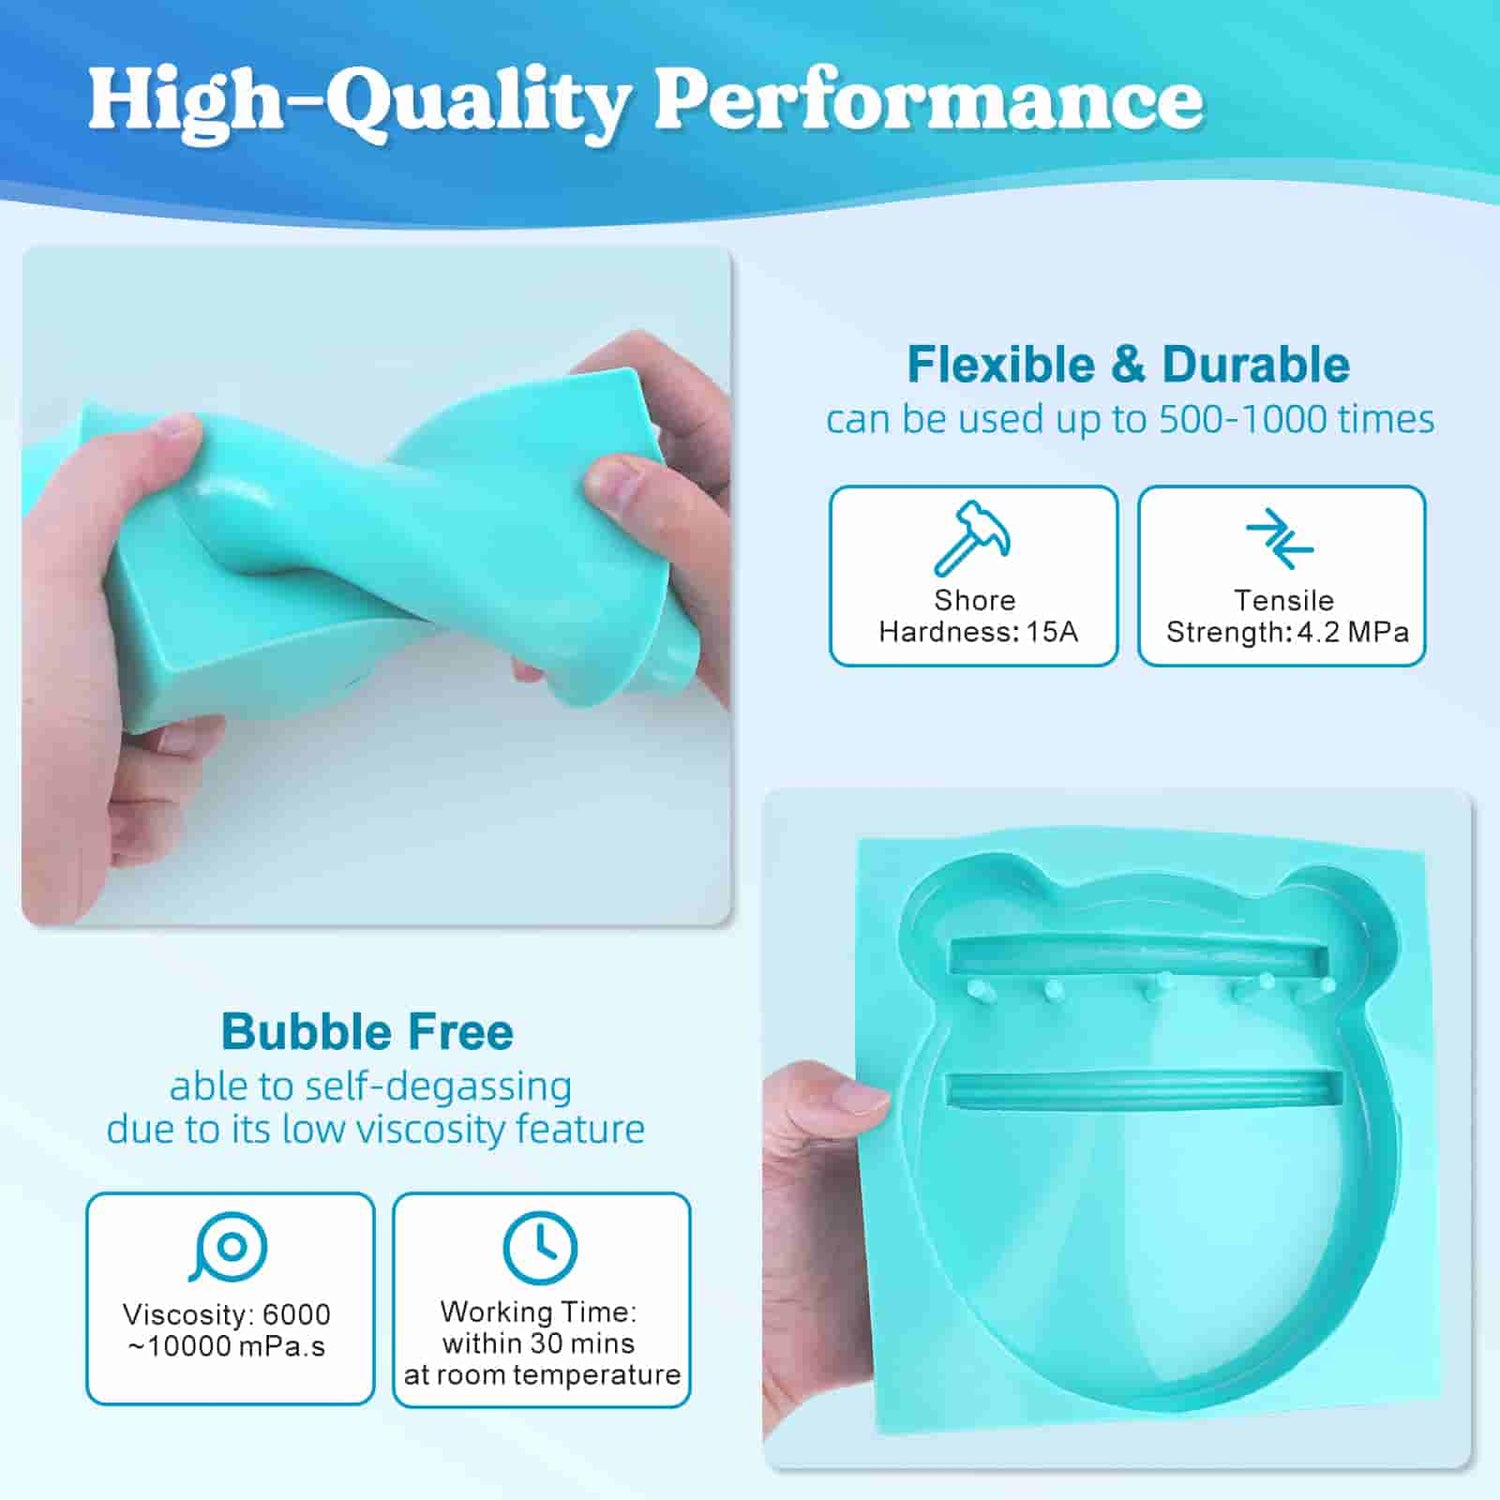 LET'S RESIN Silicone Mold Making Kit, 30A Liquid Silicone Rubber, 32 oz  Non-Toxic, Odorless - 1:1 Mixing Ratio Silicone for DIY Resin Mold,  Casting, Candle Making Molds, Soap Making Molds(Blue) – Let's Resin